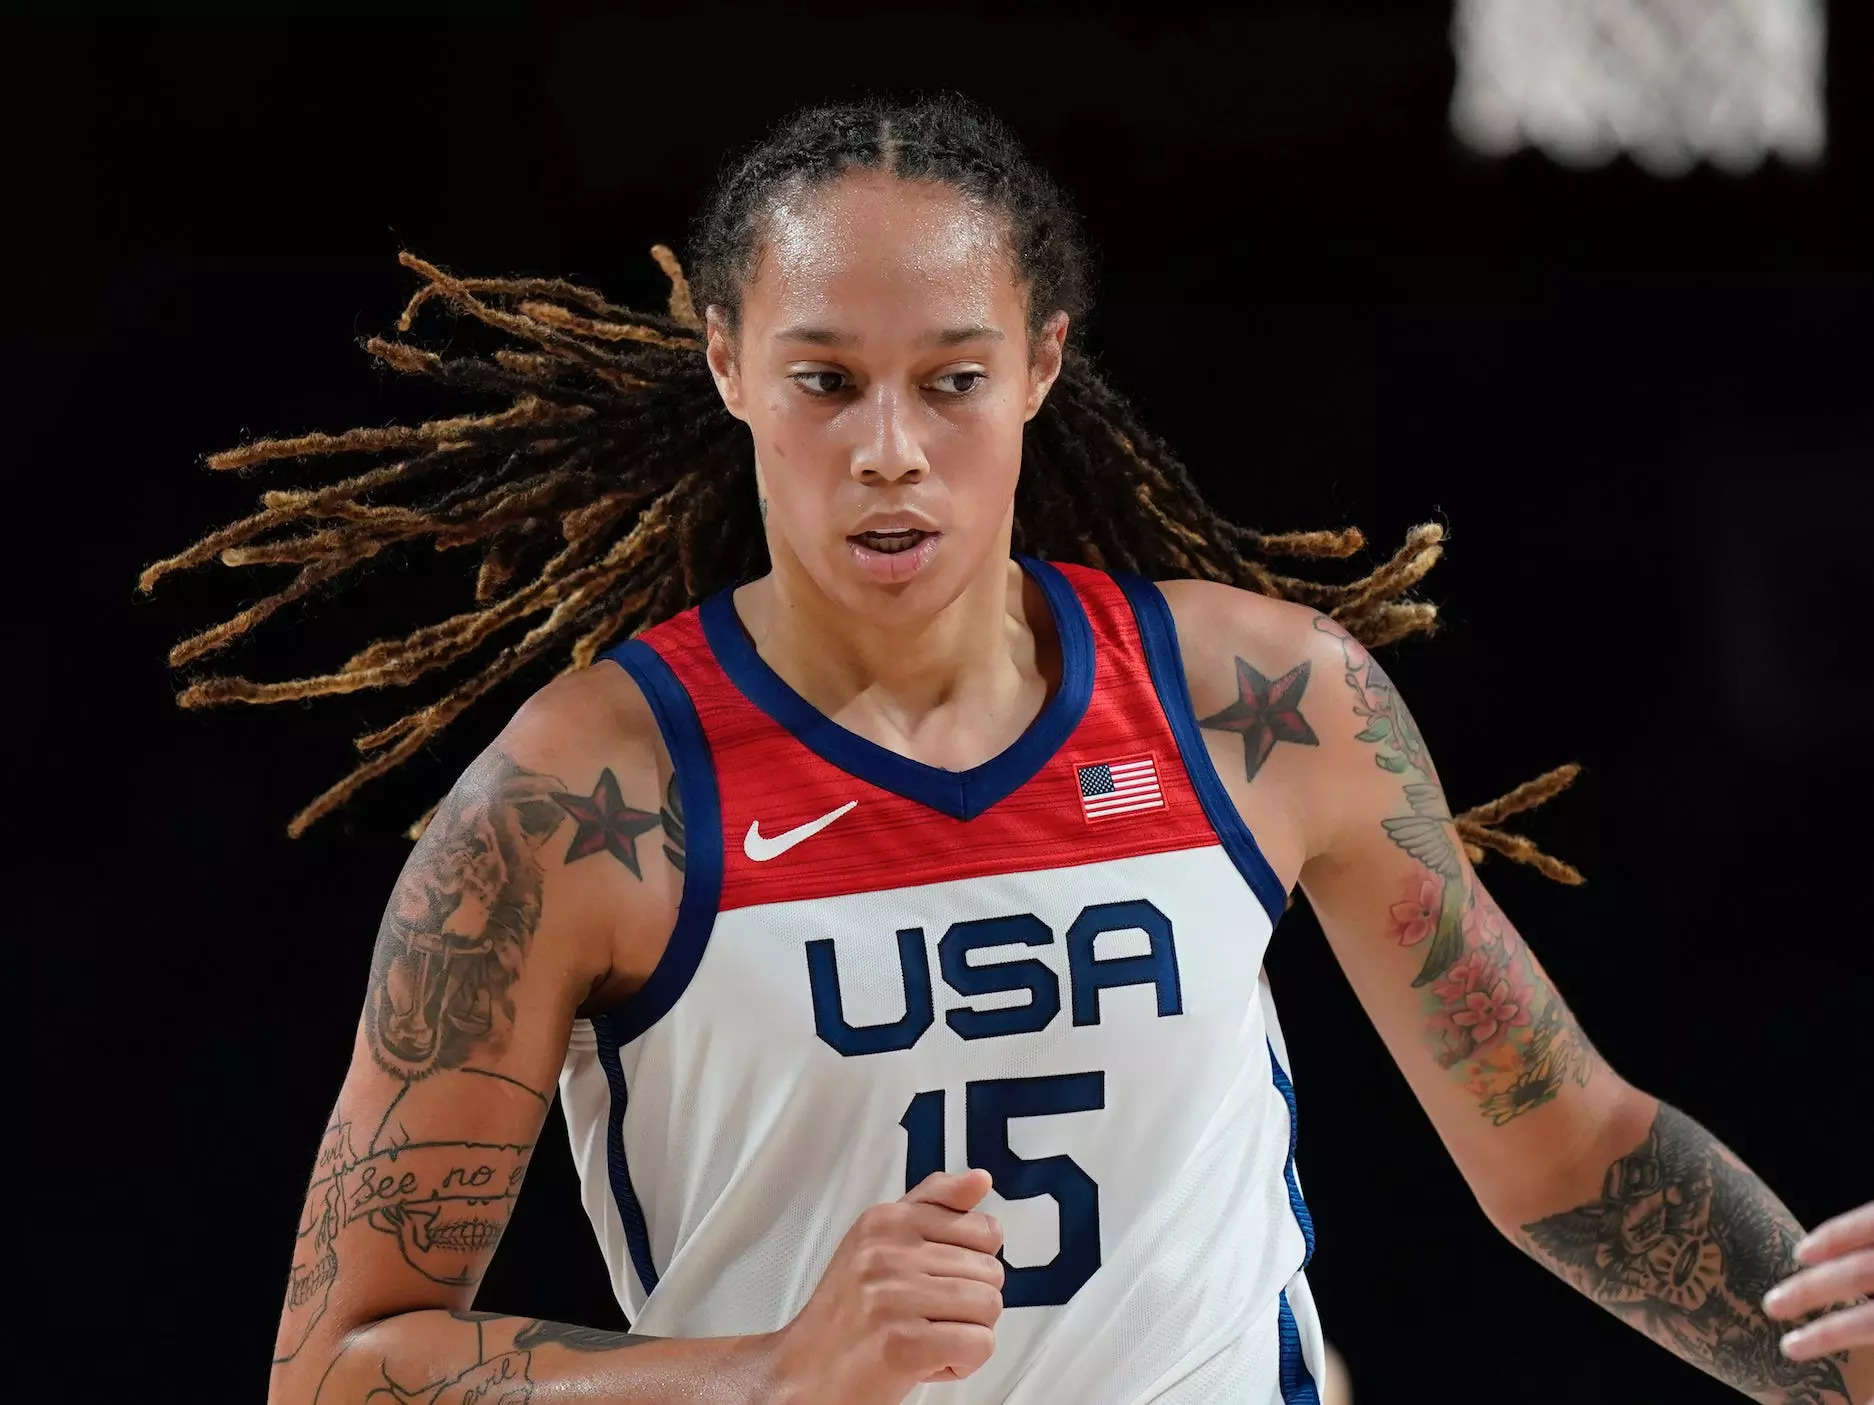 Russia Extends The Detention Of Wnba Star Brittney Griner As She Keeps Her Head Down In Rare Court Appearance Business Insider India